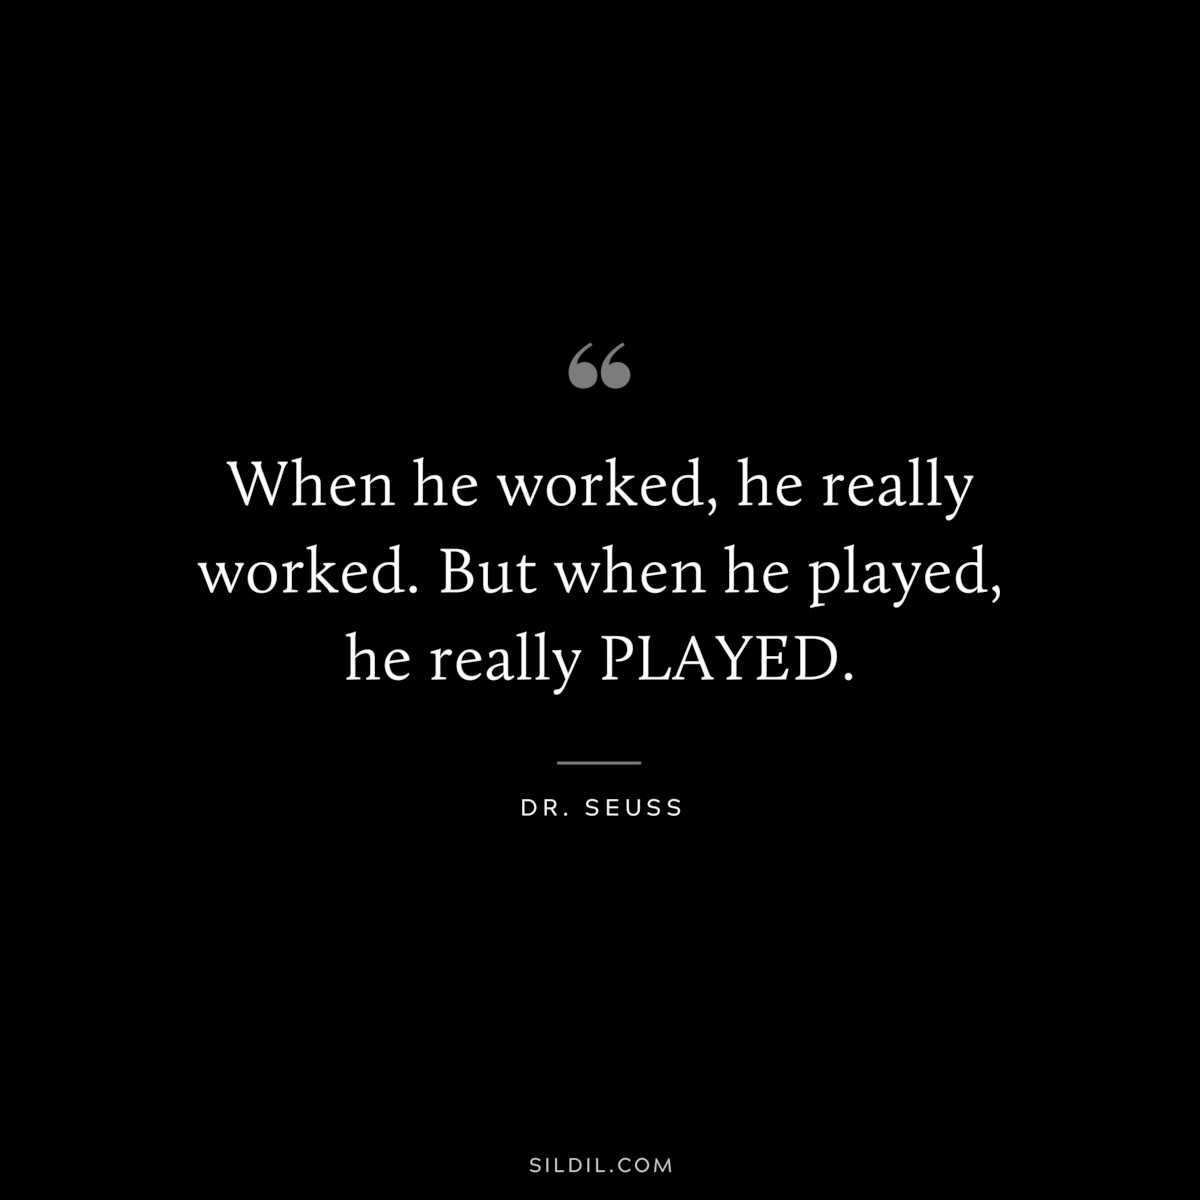 When he worked, he really worked. But when he played, he really PLAYED. ― Dr. Seuss